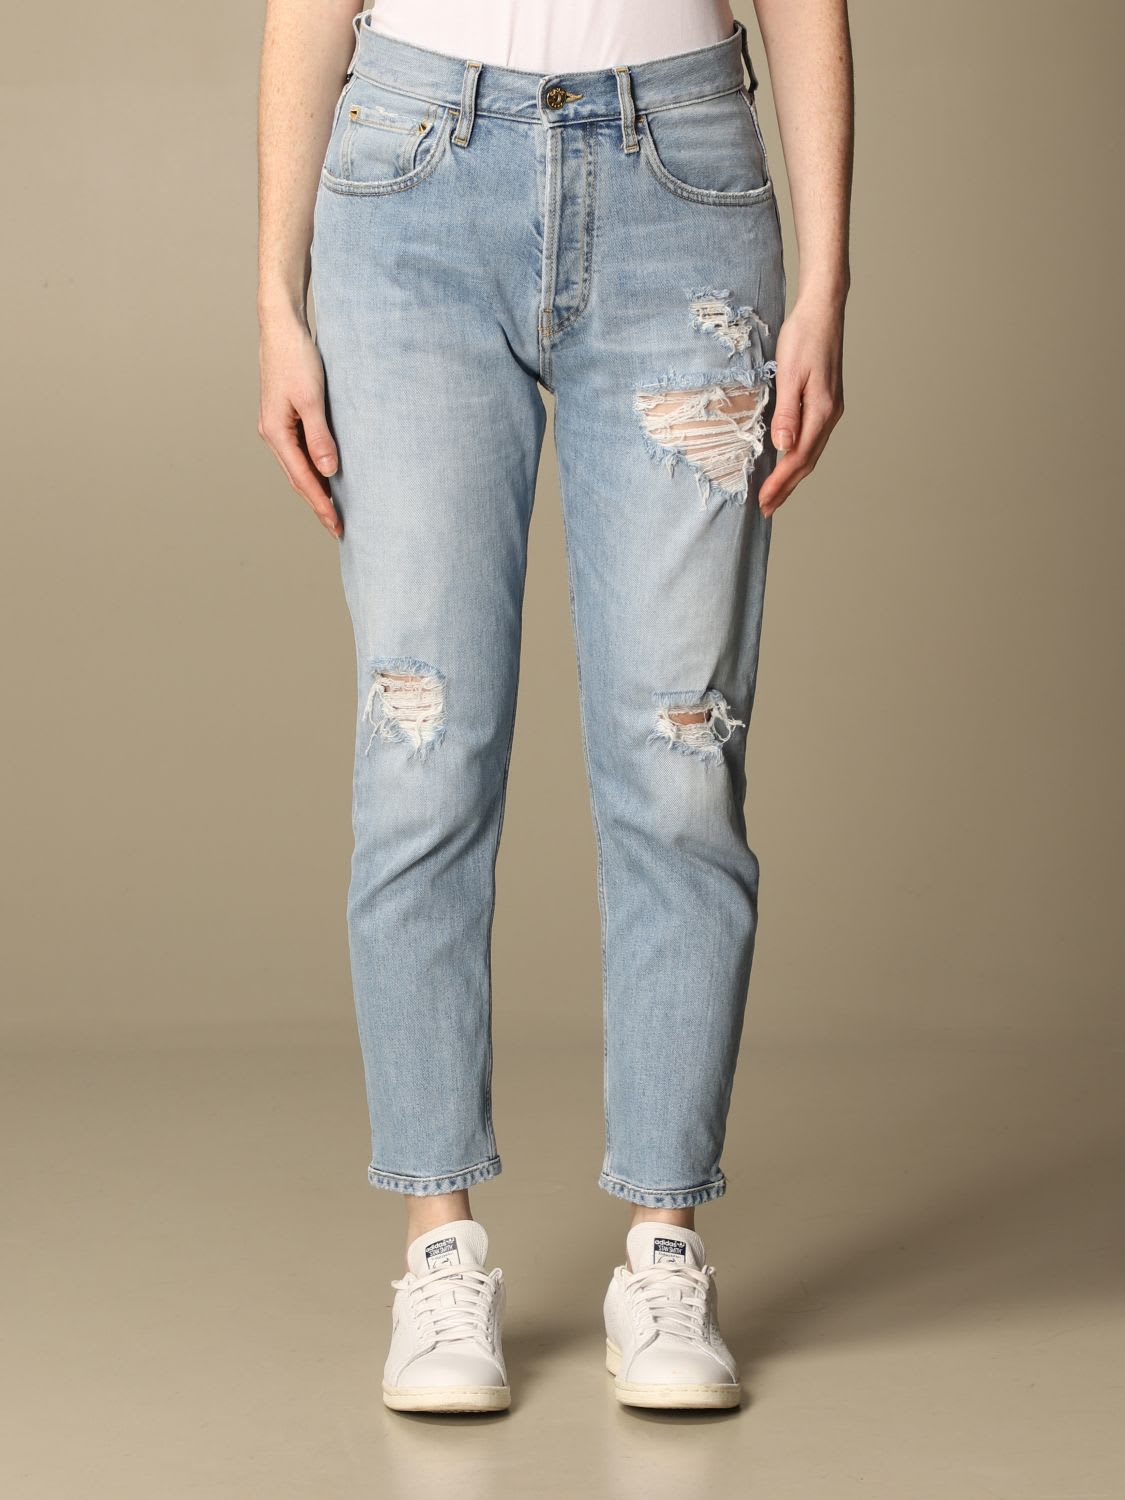 Cycle Jeans Cycle Boyfriend Jeans In Denim With Rips